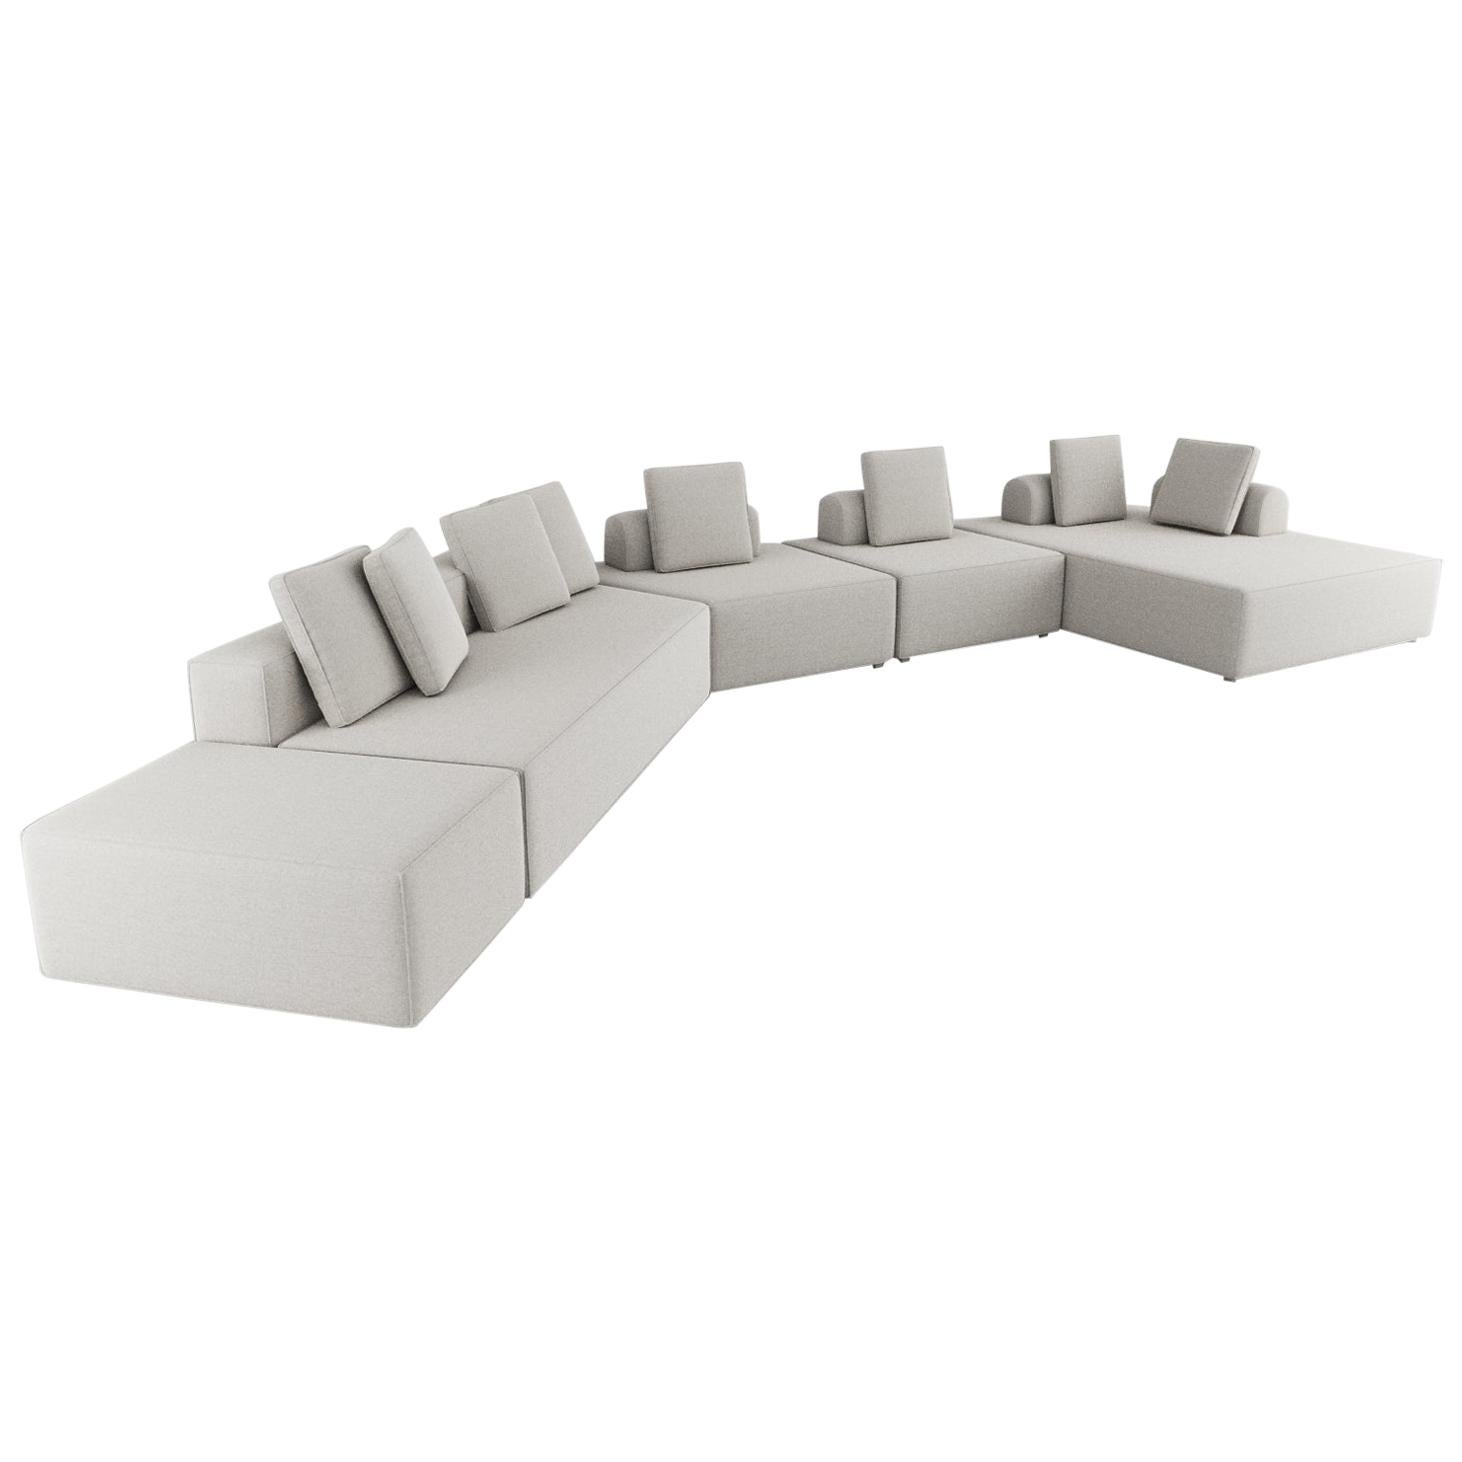 Block Sectional Sofa For Sale